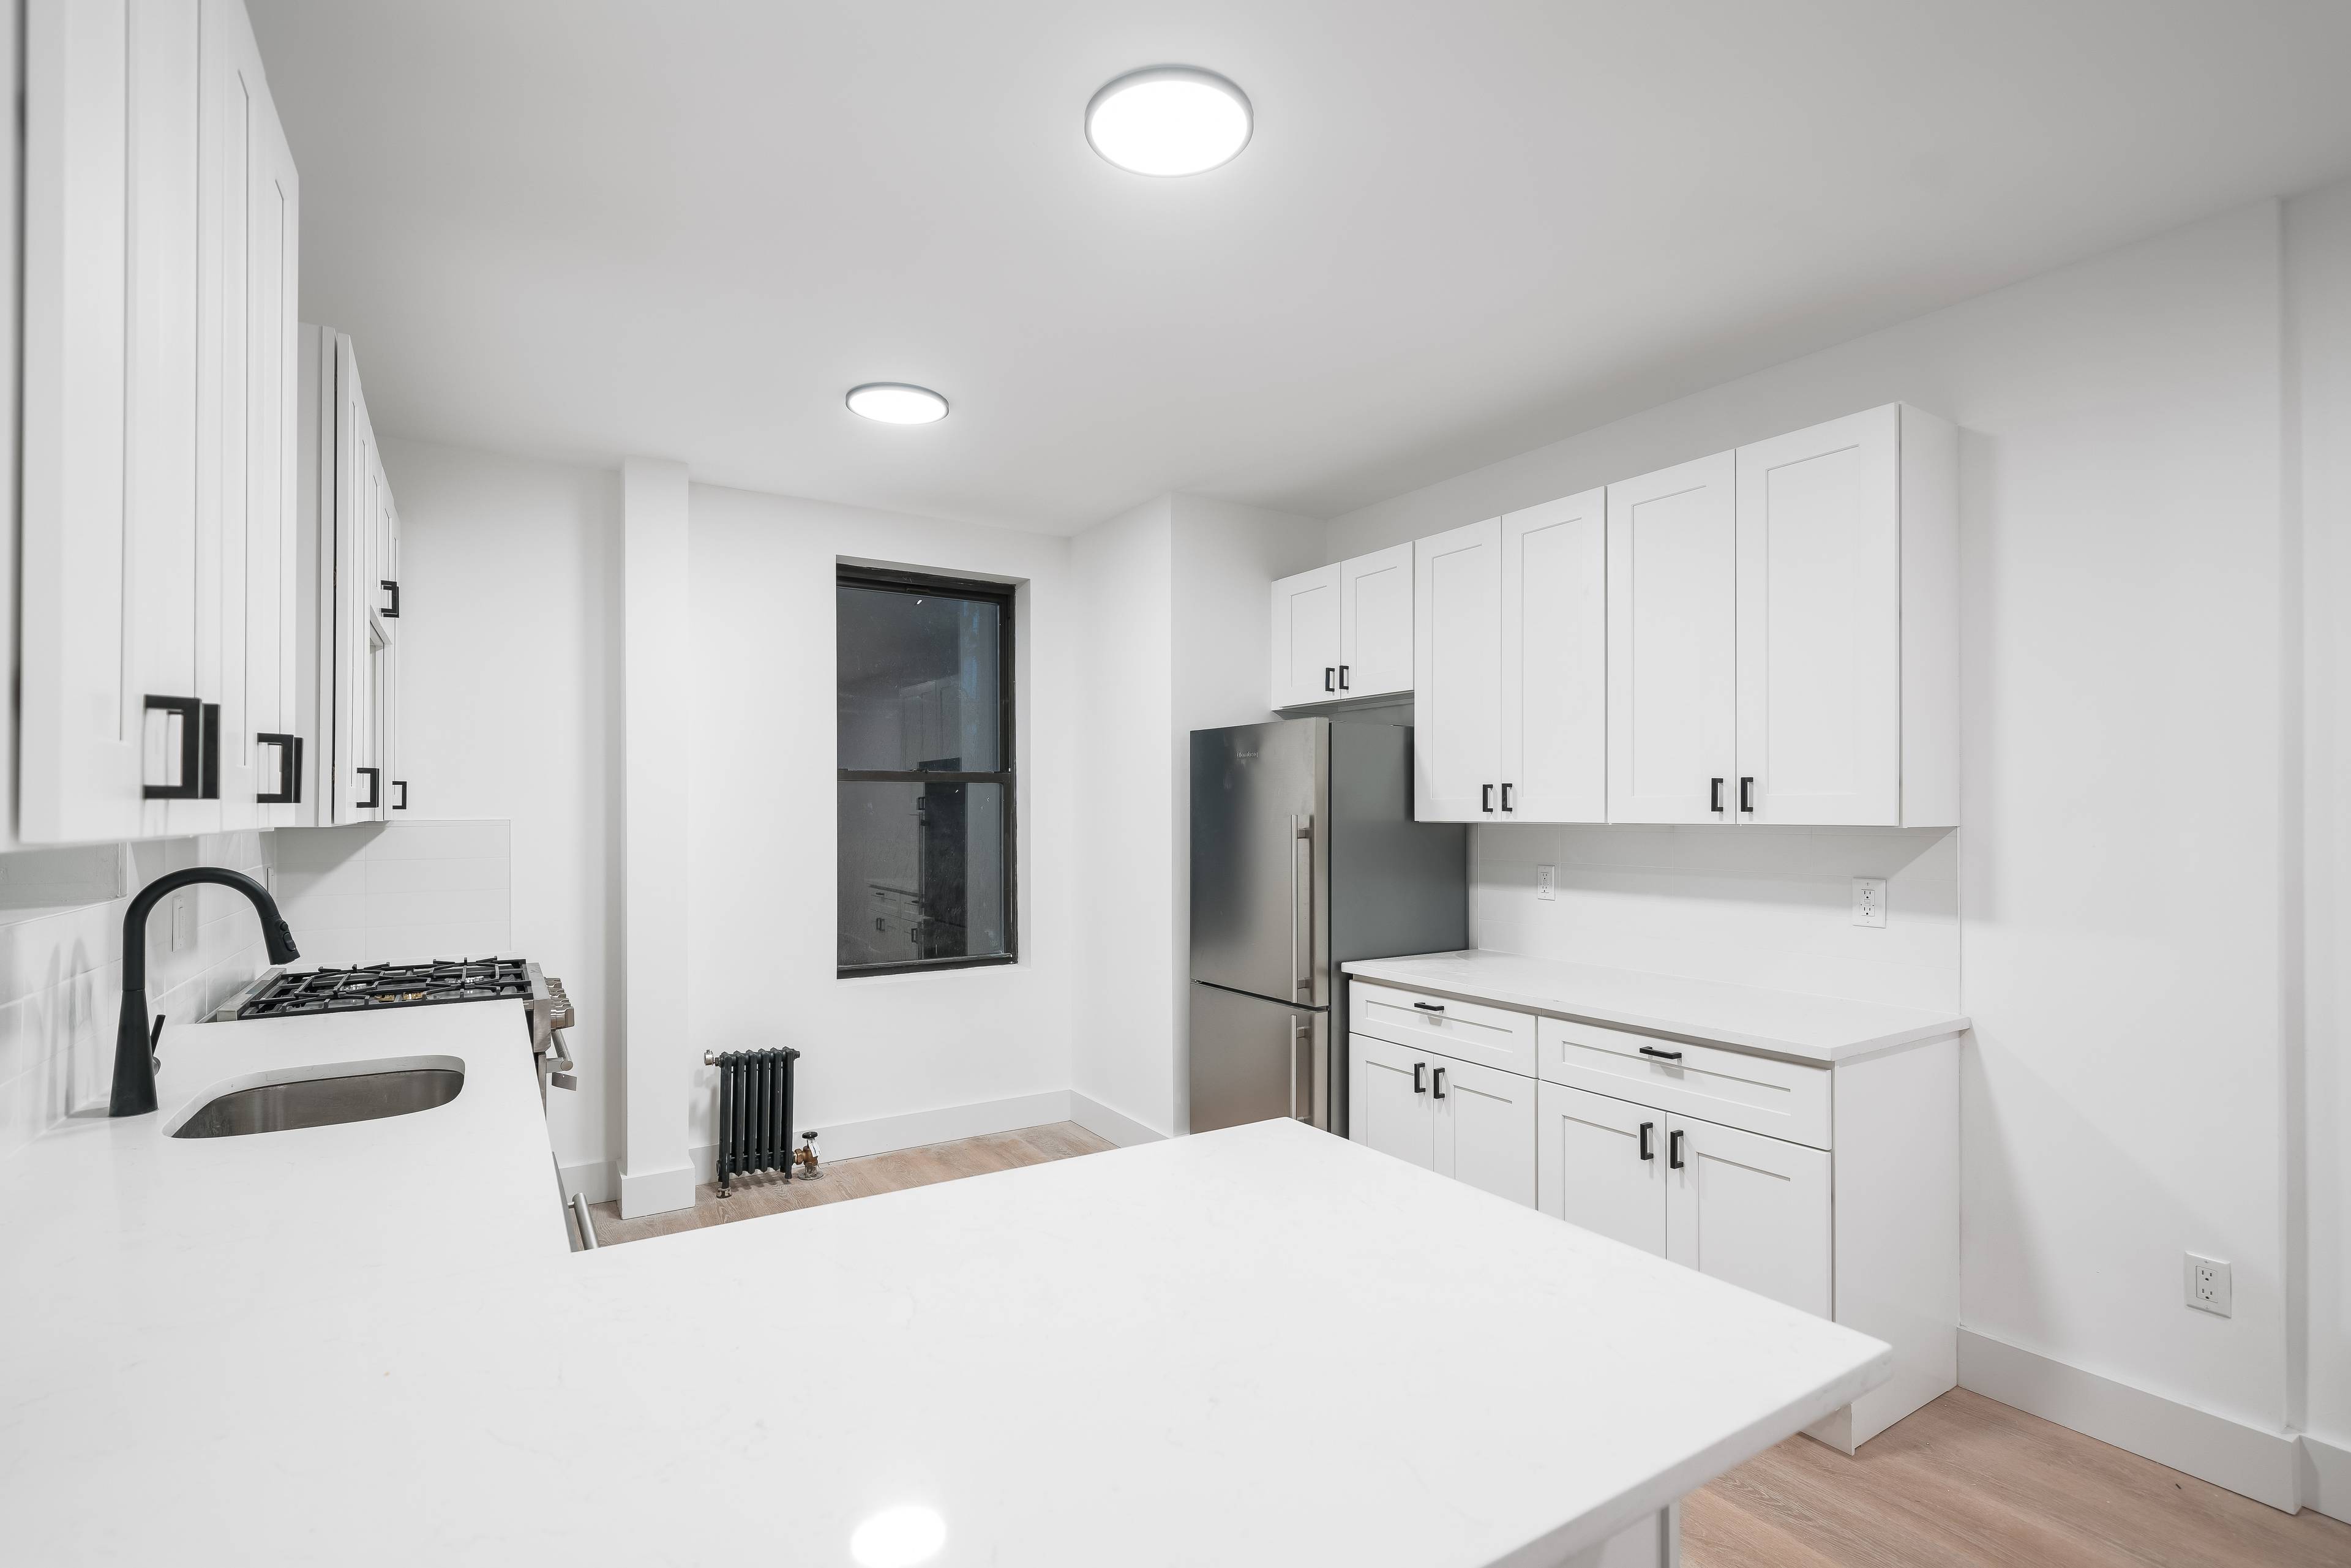 Brand New Renovated 3 Bedroom 2 Full Baths located in Uptown Hoboken NJ! Laundy In Unit